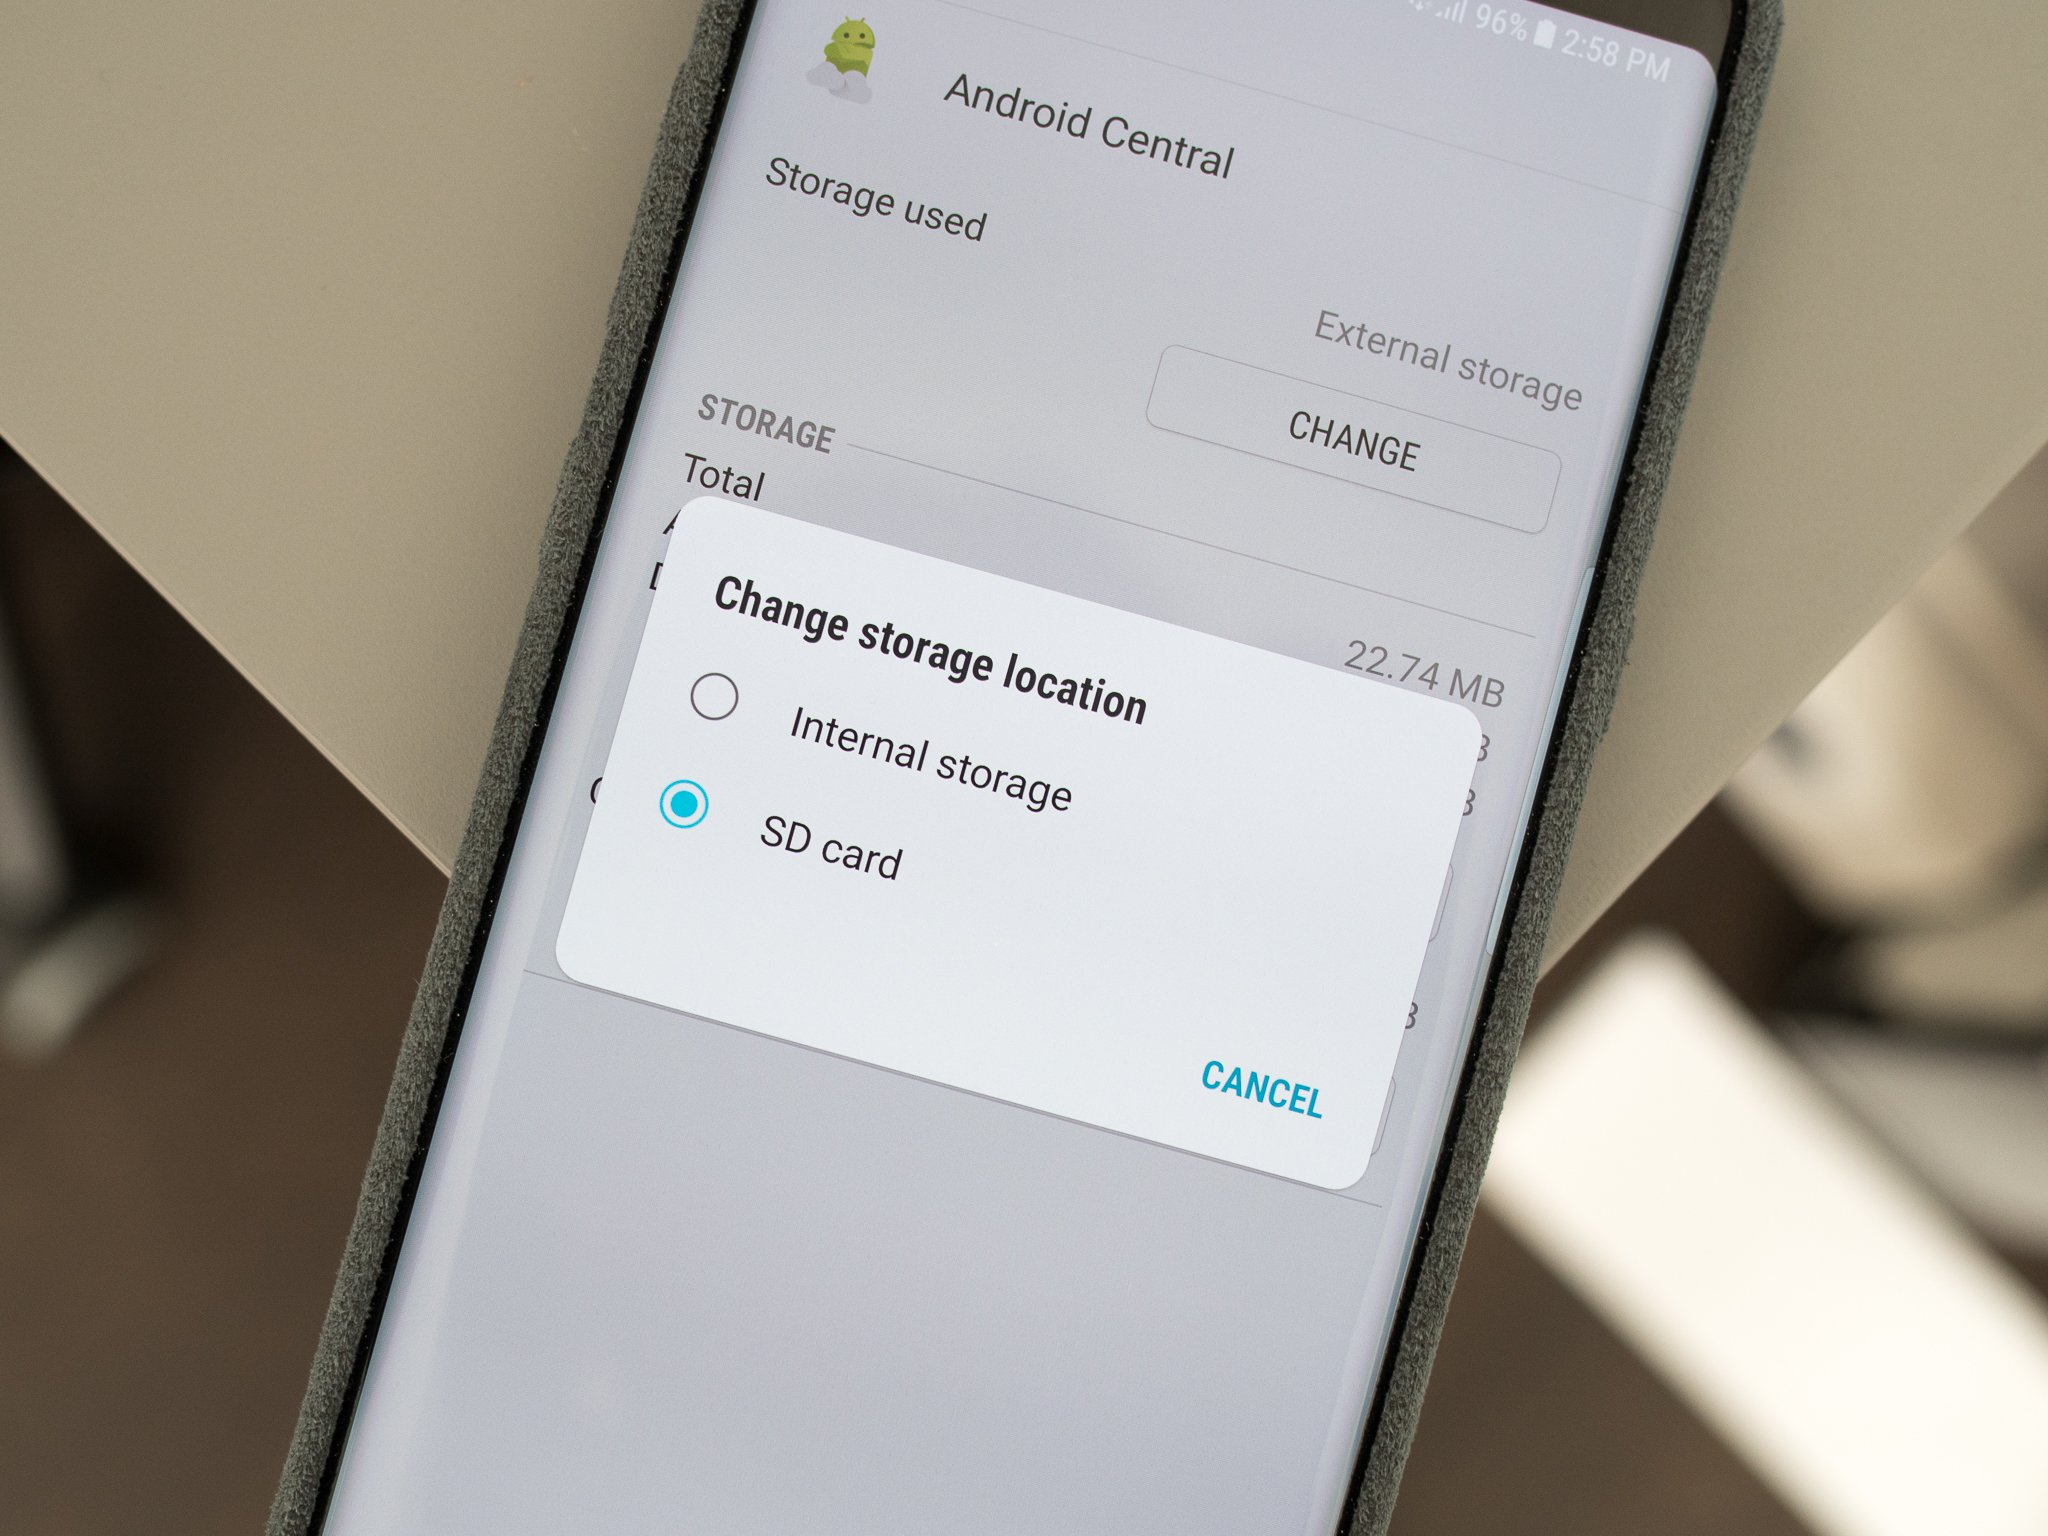 gloss referee Latin How to move apps to your SD card on the Galaxy Note 8 | Android Central